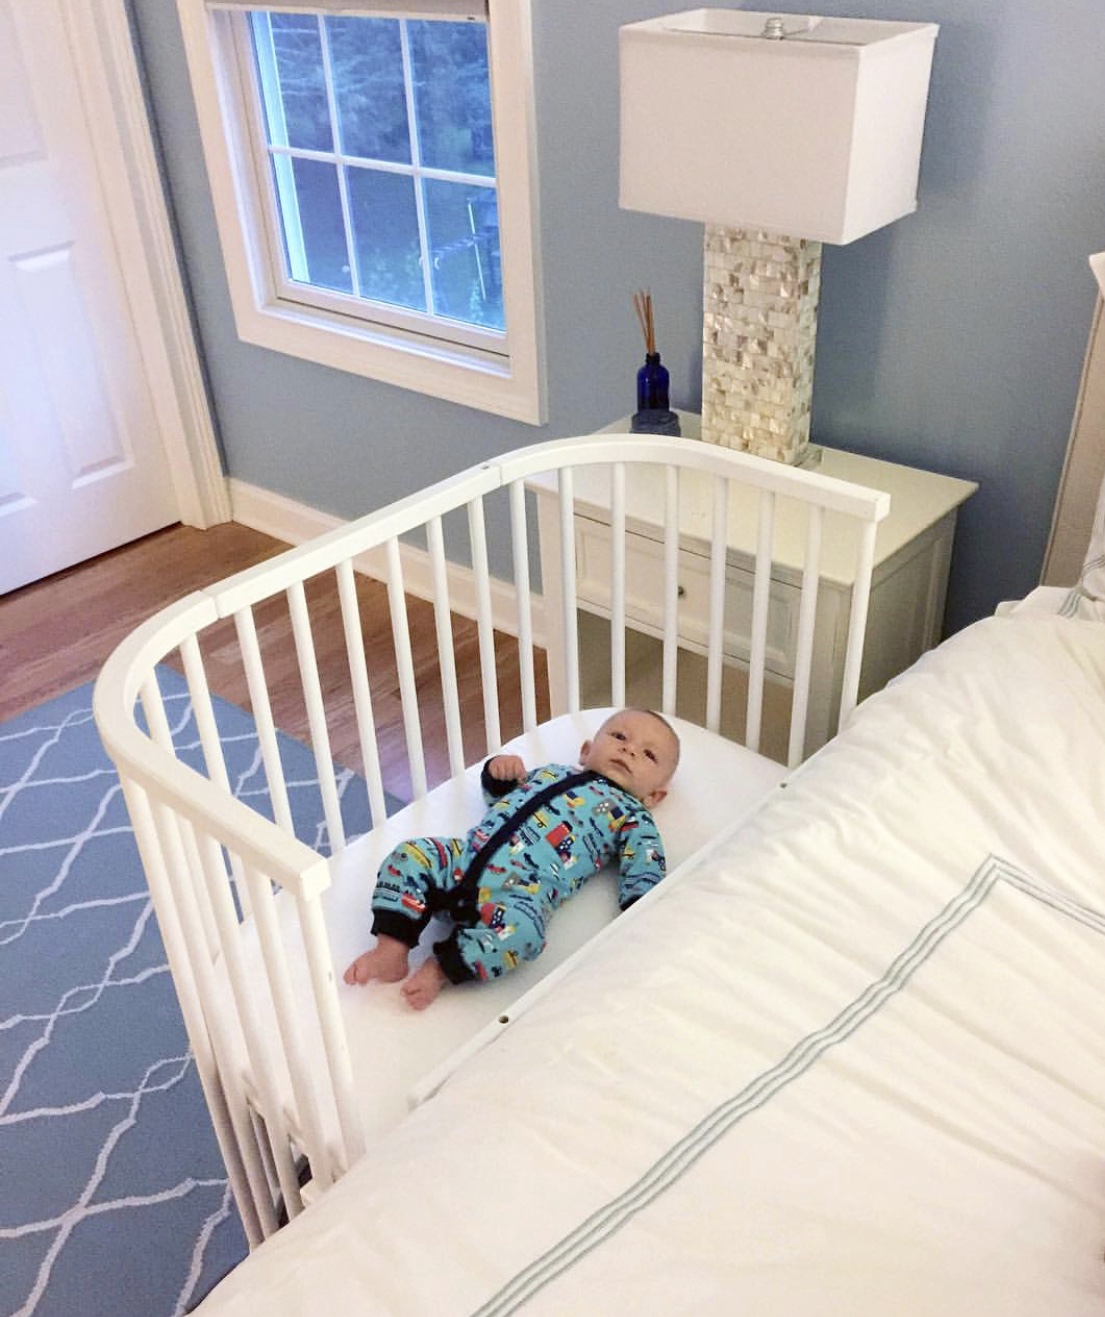 How to Safely Co Sleep With Newborn in the Perfect Shared Bedroom Setup